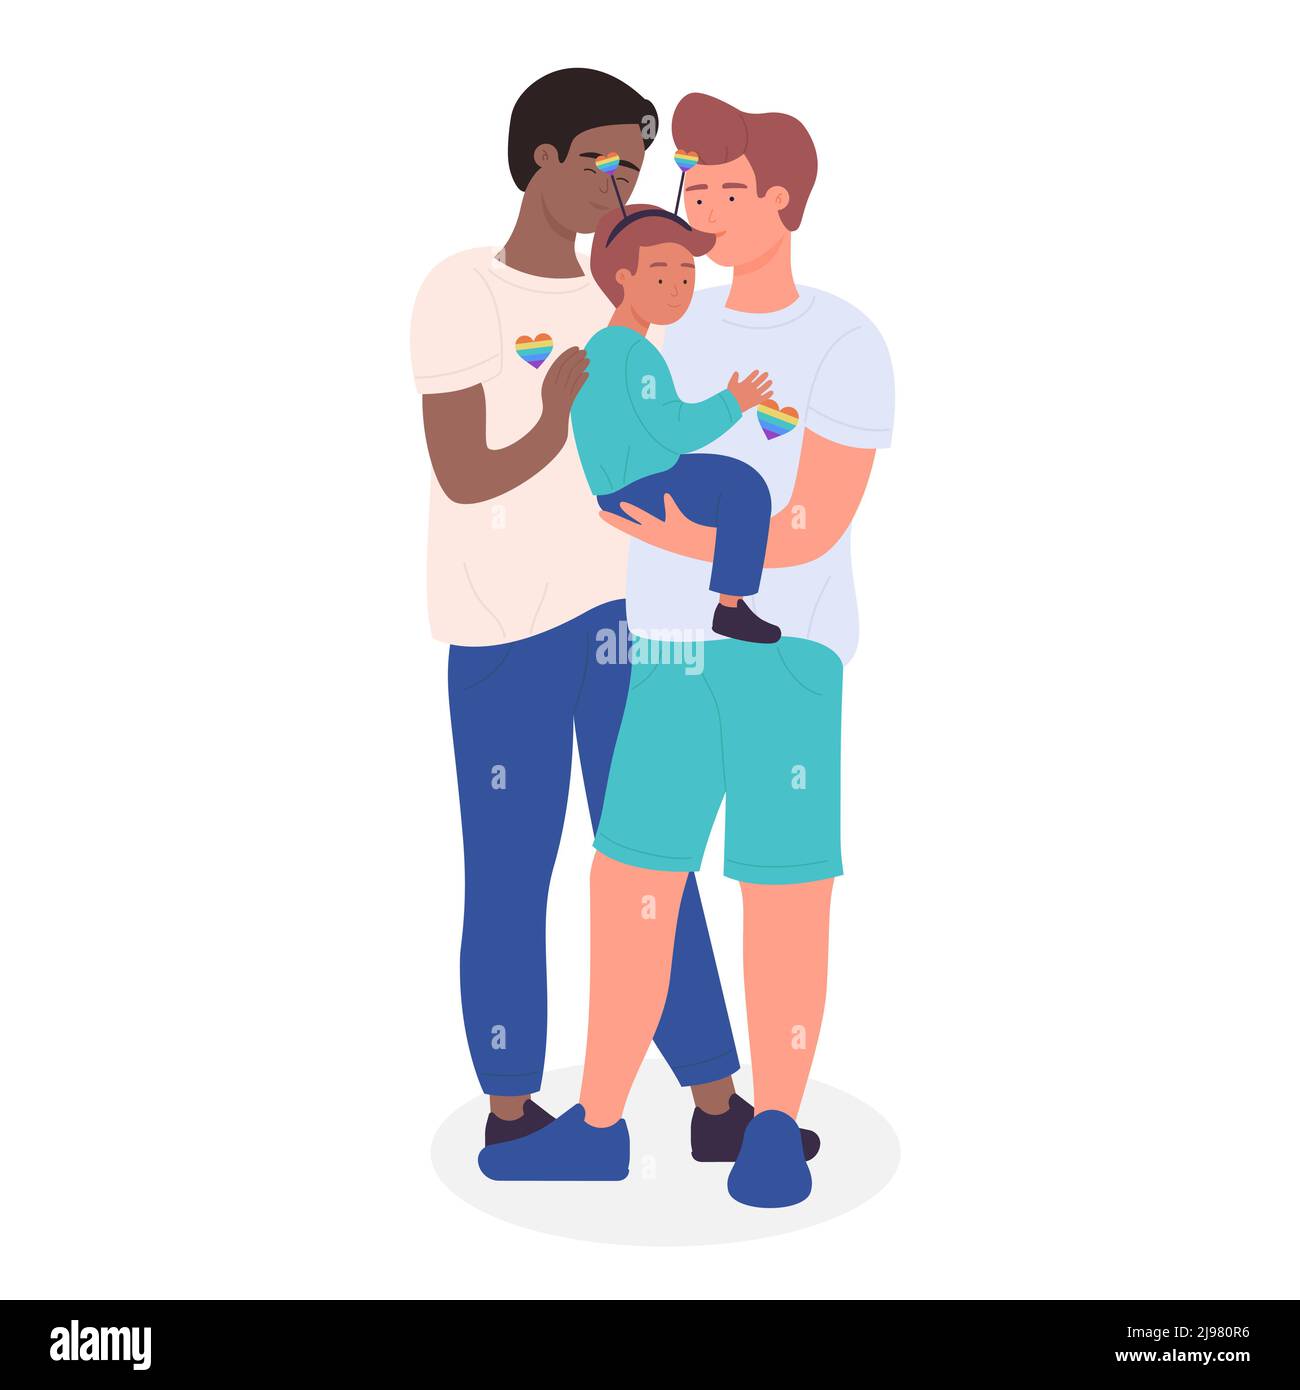 Gay couple standing together with adopted child. Happy lgbt family and parenting rights cartoon vector illustration Stock Vector